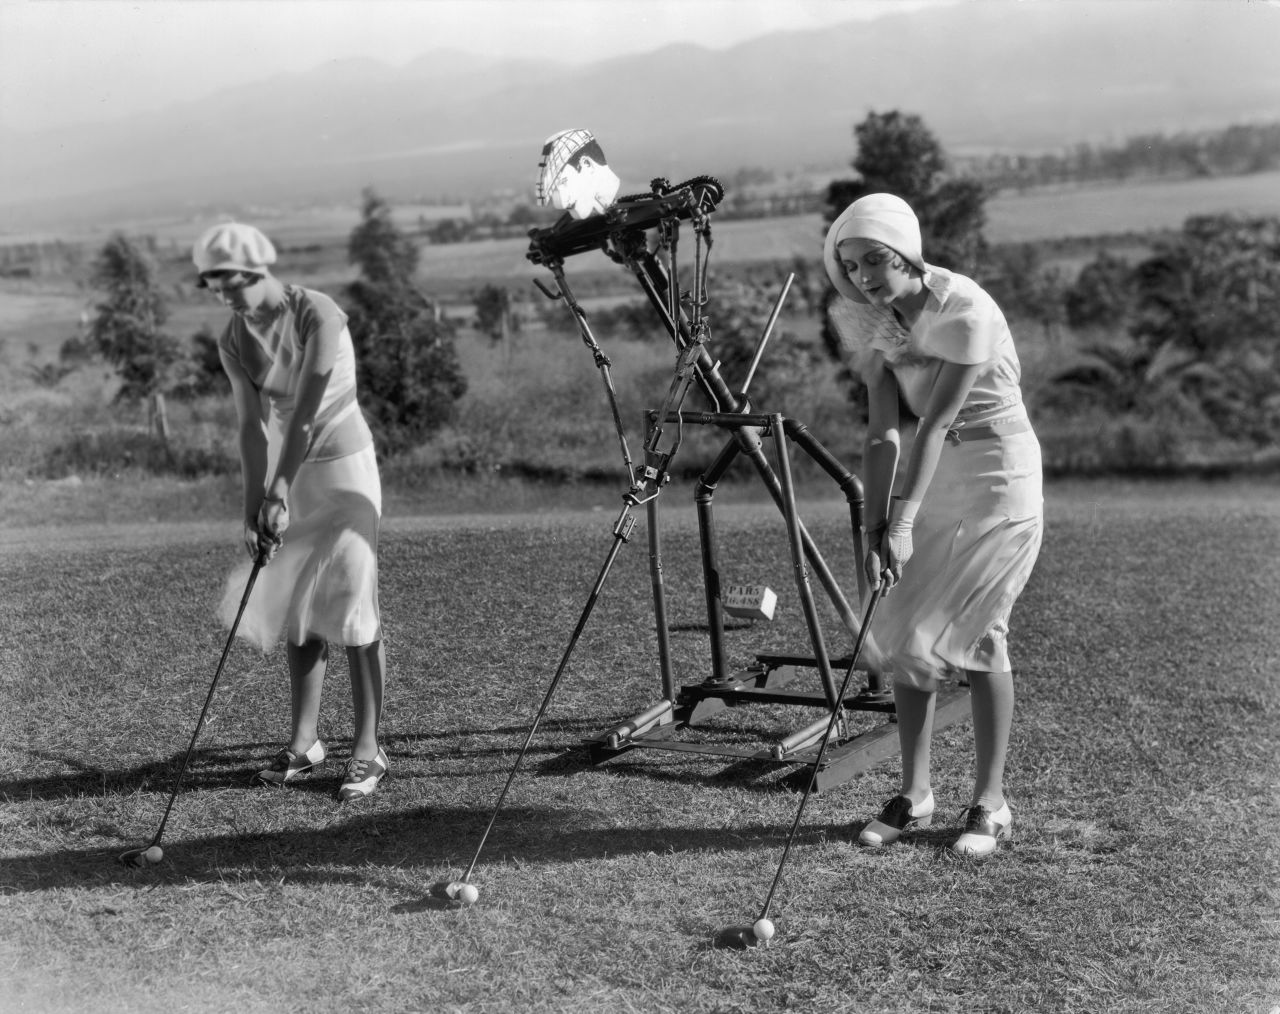 An early prototype robot was used to assist two women golfers with their swings in this 1925 picture.